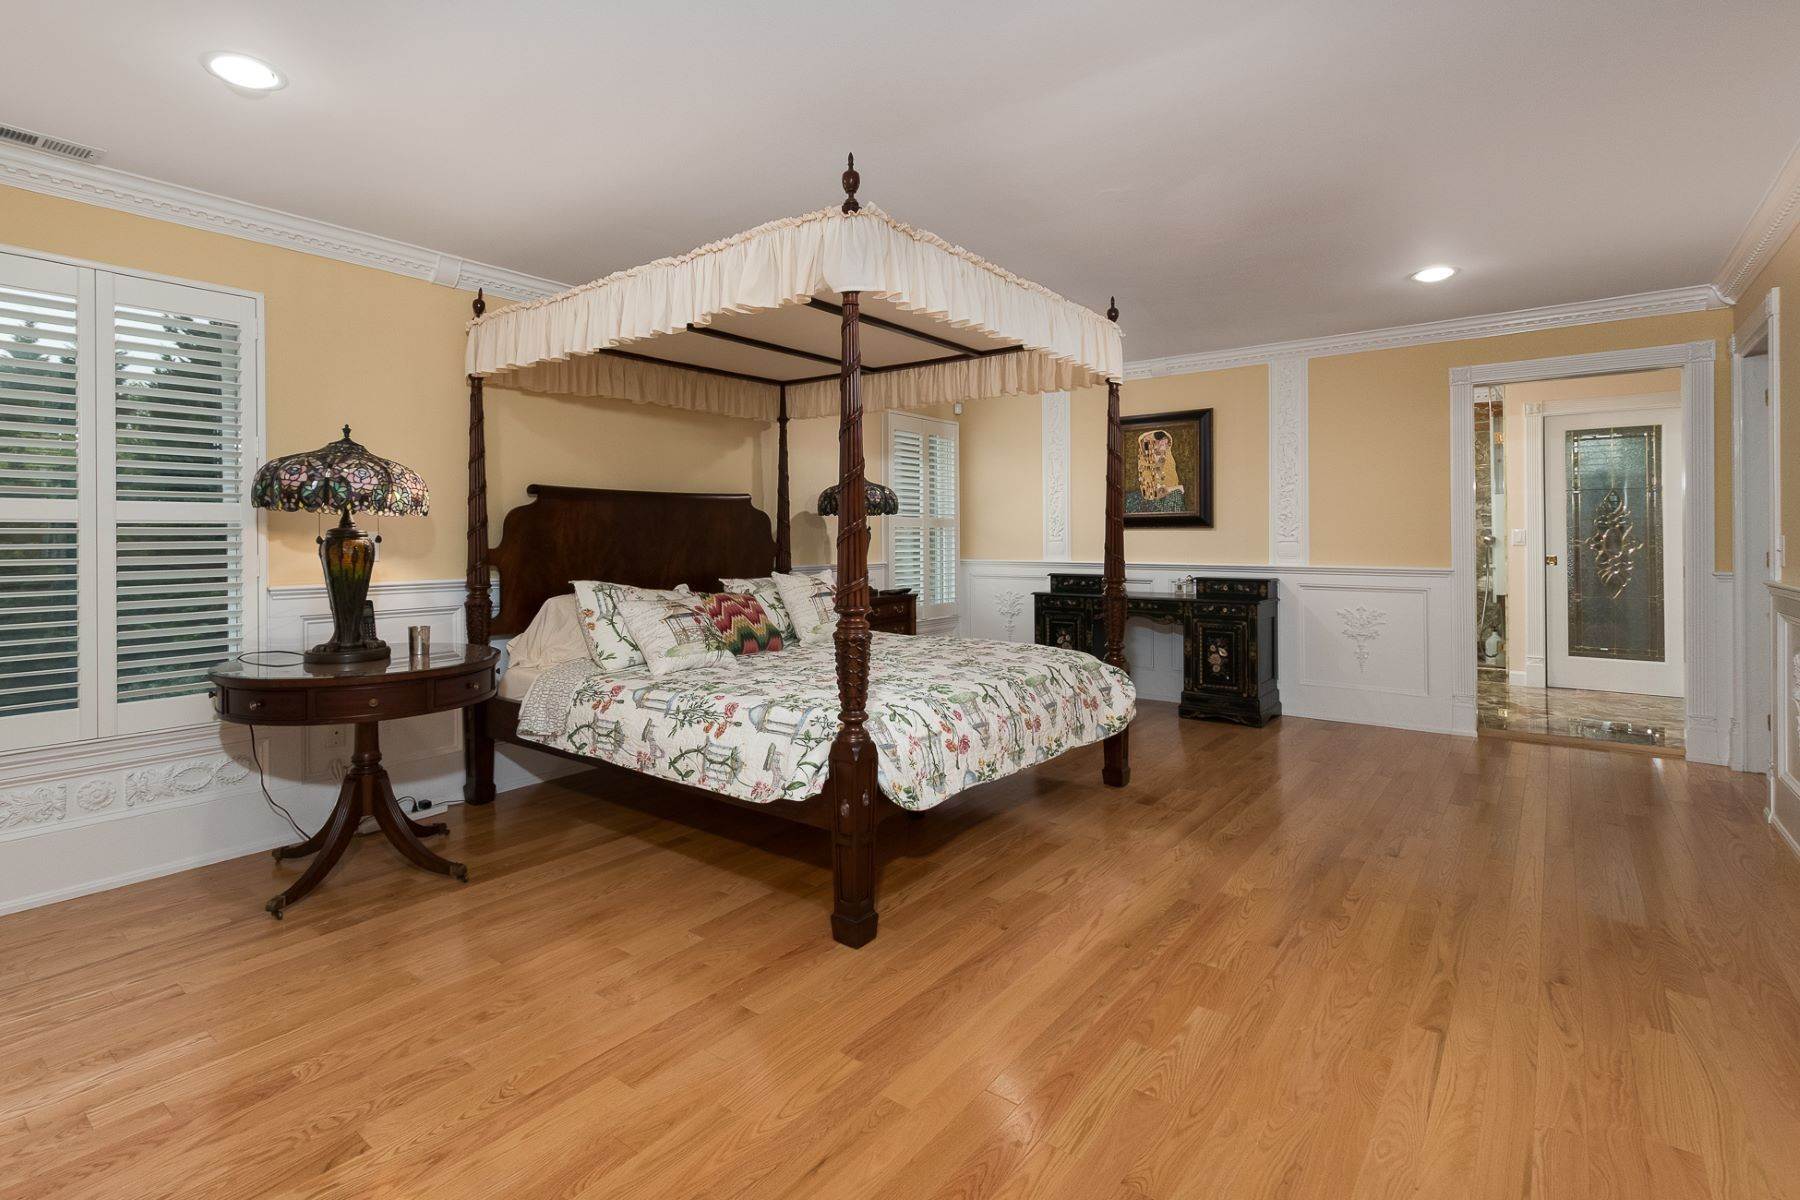 16. Single Family Homes for Sale at Lavish Decor, Indulgent Baths and Party-Ready Pool 305 Cobblestone Way, Lawrence Township, New Jersey 08648 United States